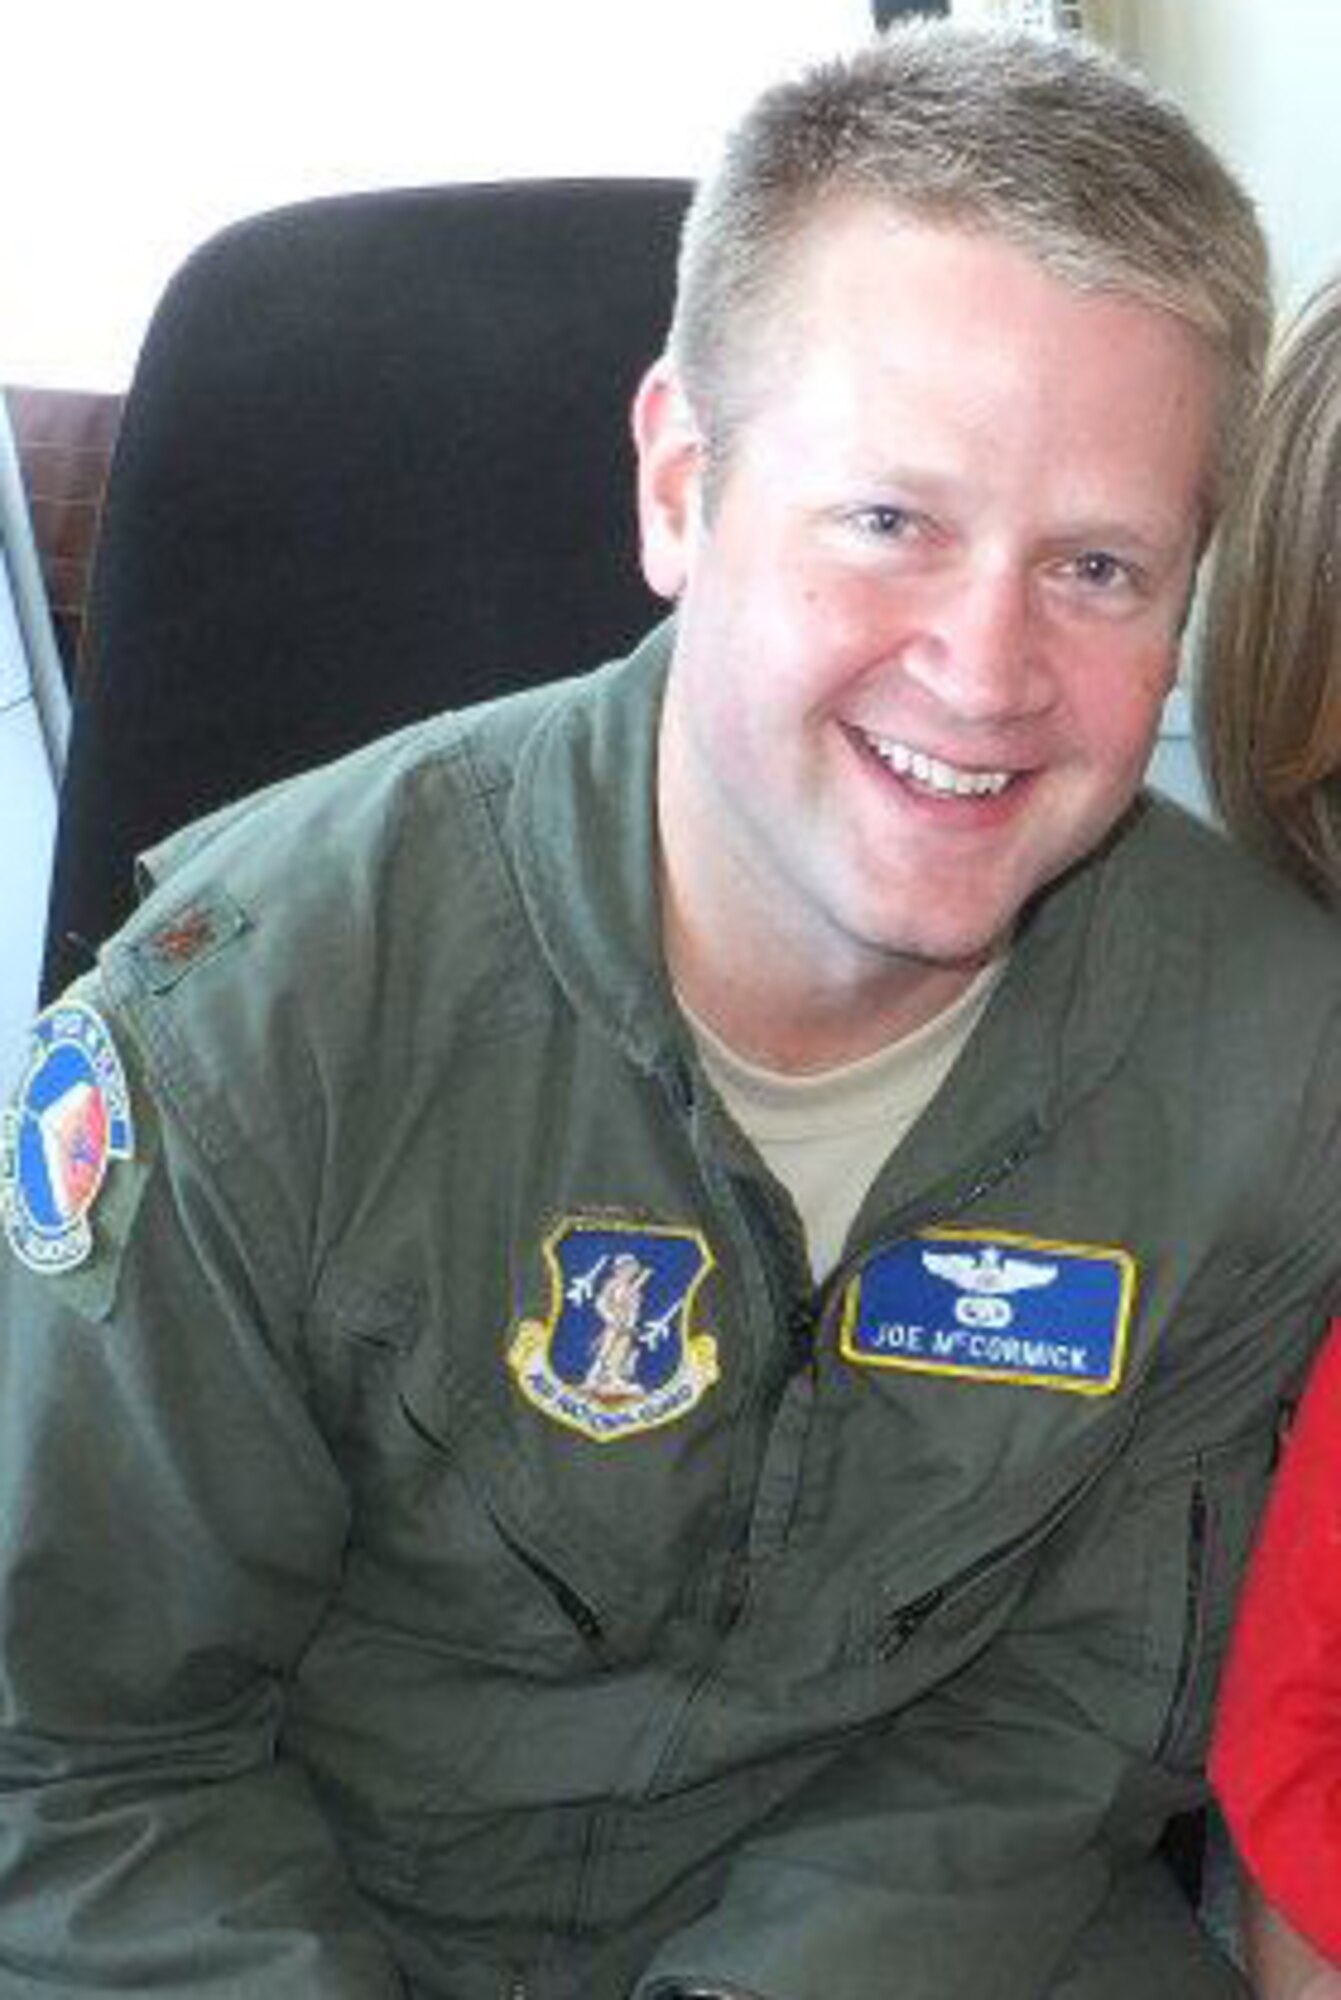 C-130 pilot Major Joseph M. McCormick, one of 4 crew members who were killed July 1, 2012 after their C-130 crashed while fighting wildfires in South Dakota. (courtesy photo)
